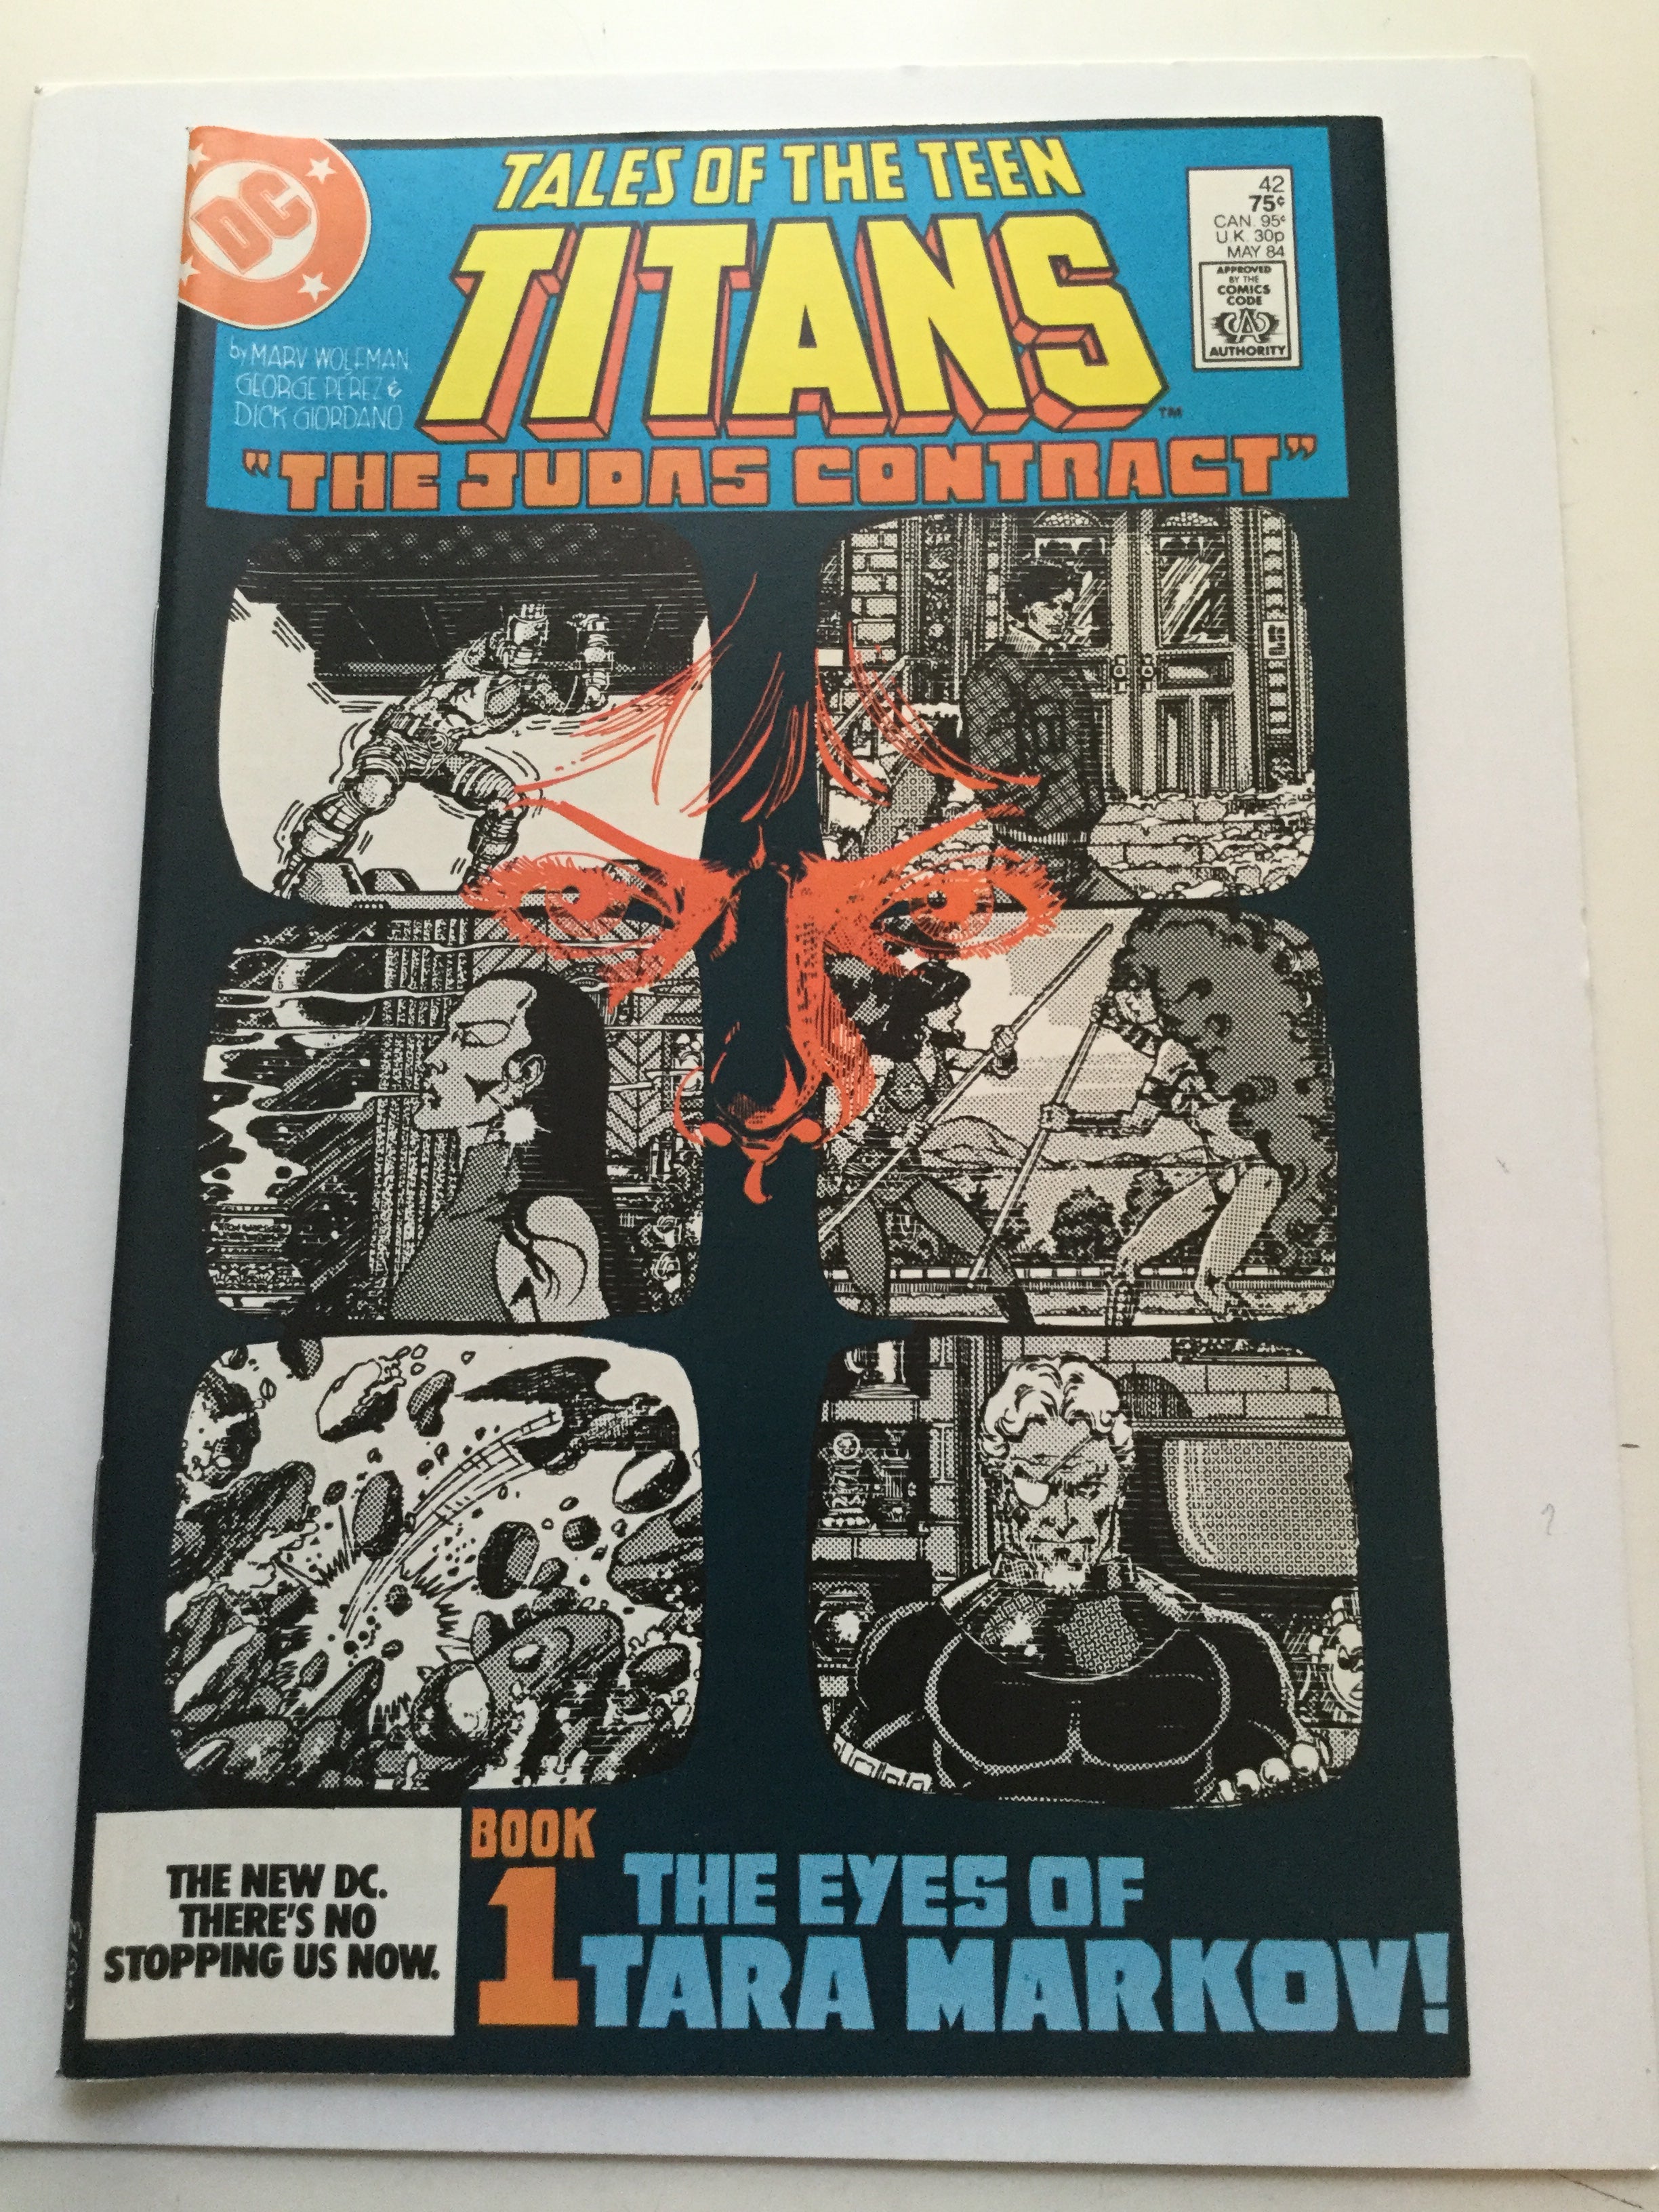 Tales of the Teen Titans #42 comic book